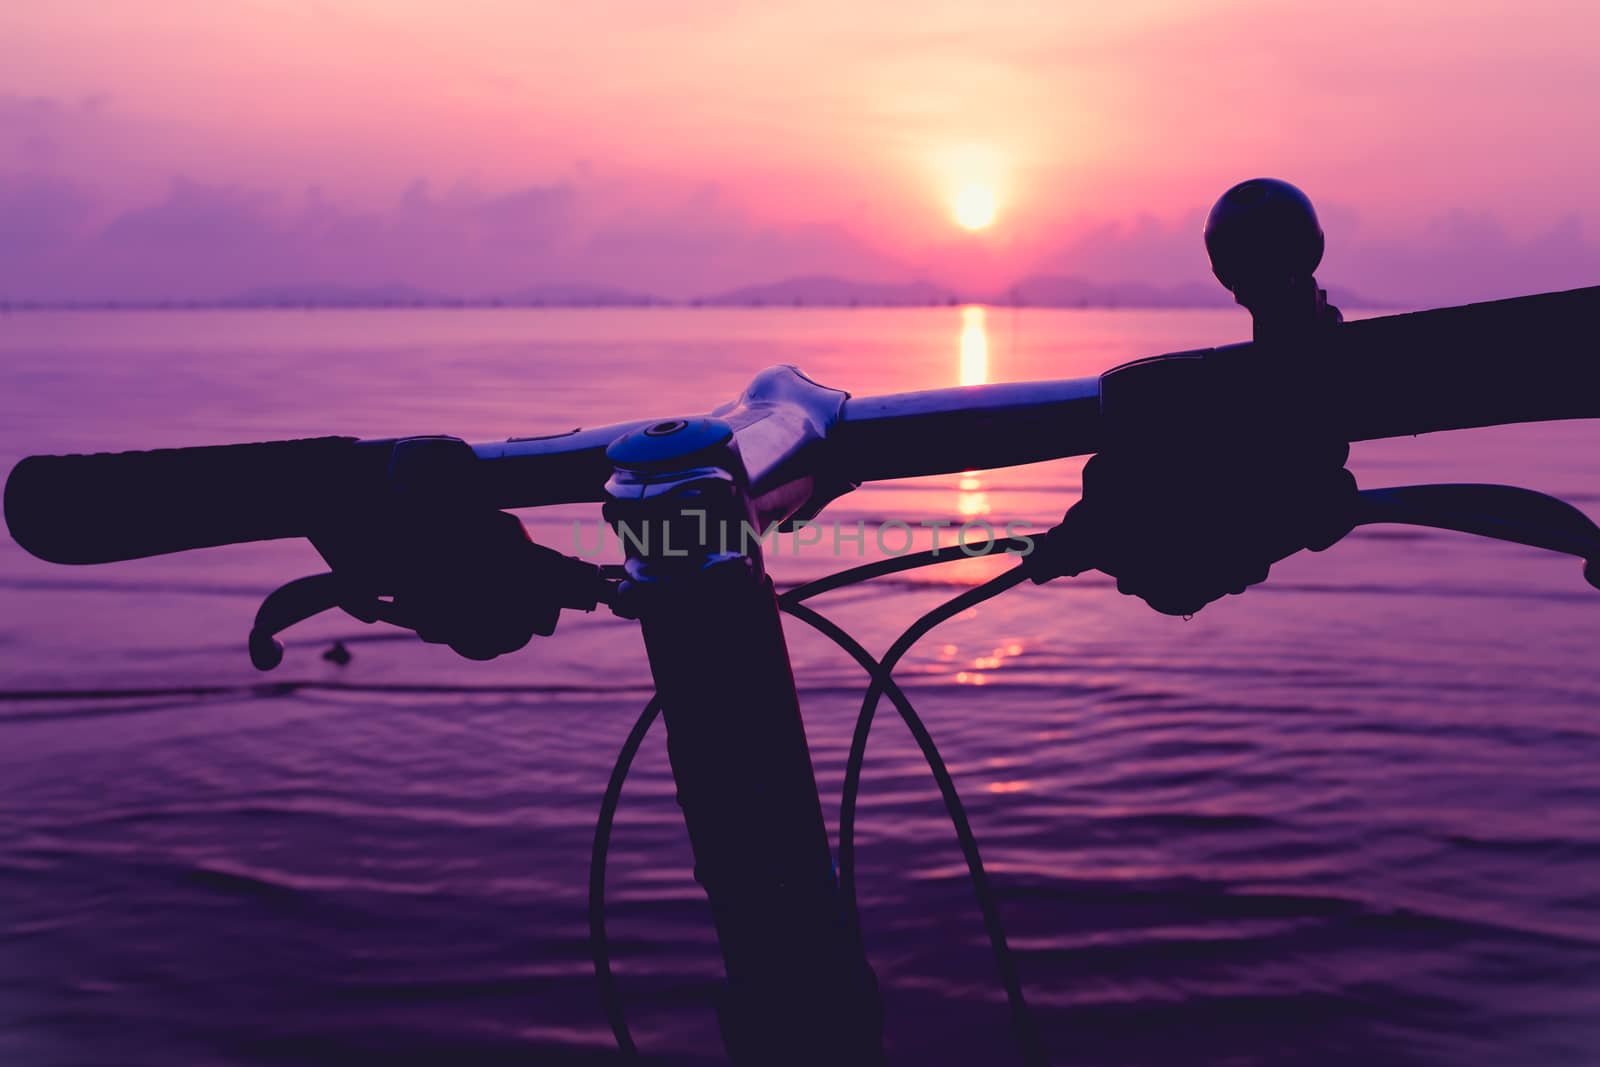 Silhouette of a parts bicycle, handlebar on the beach against colorful sunset in the sea, purple sky background. Reflection of sun in water. Outdoors.